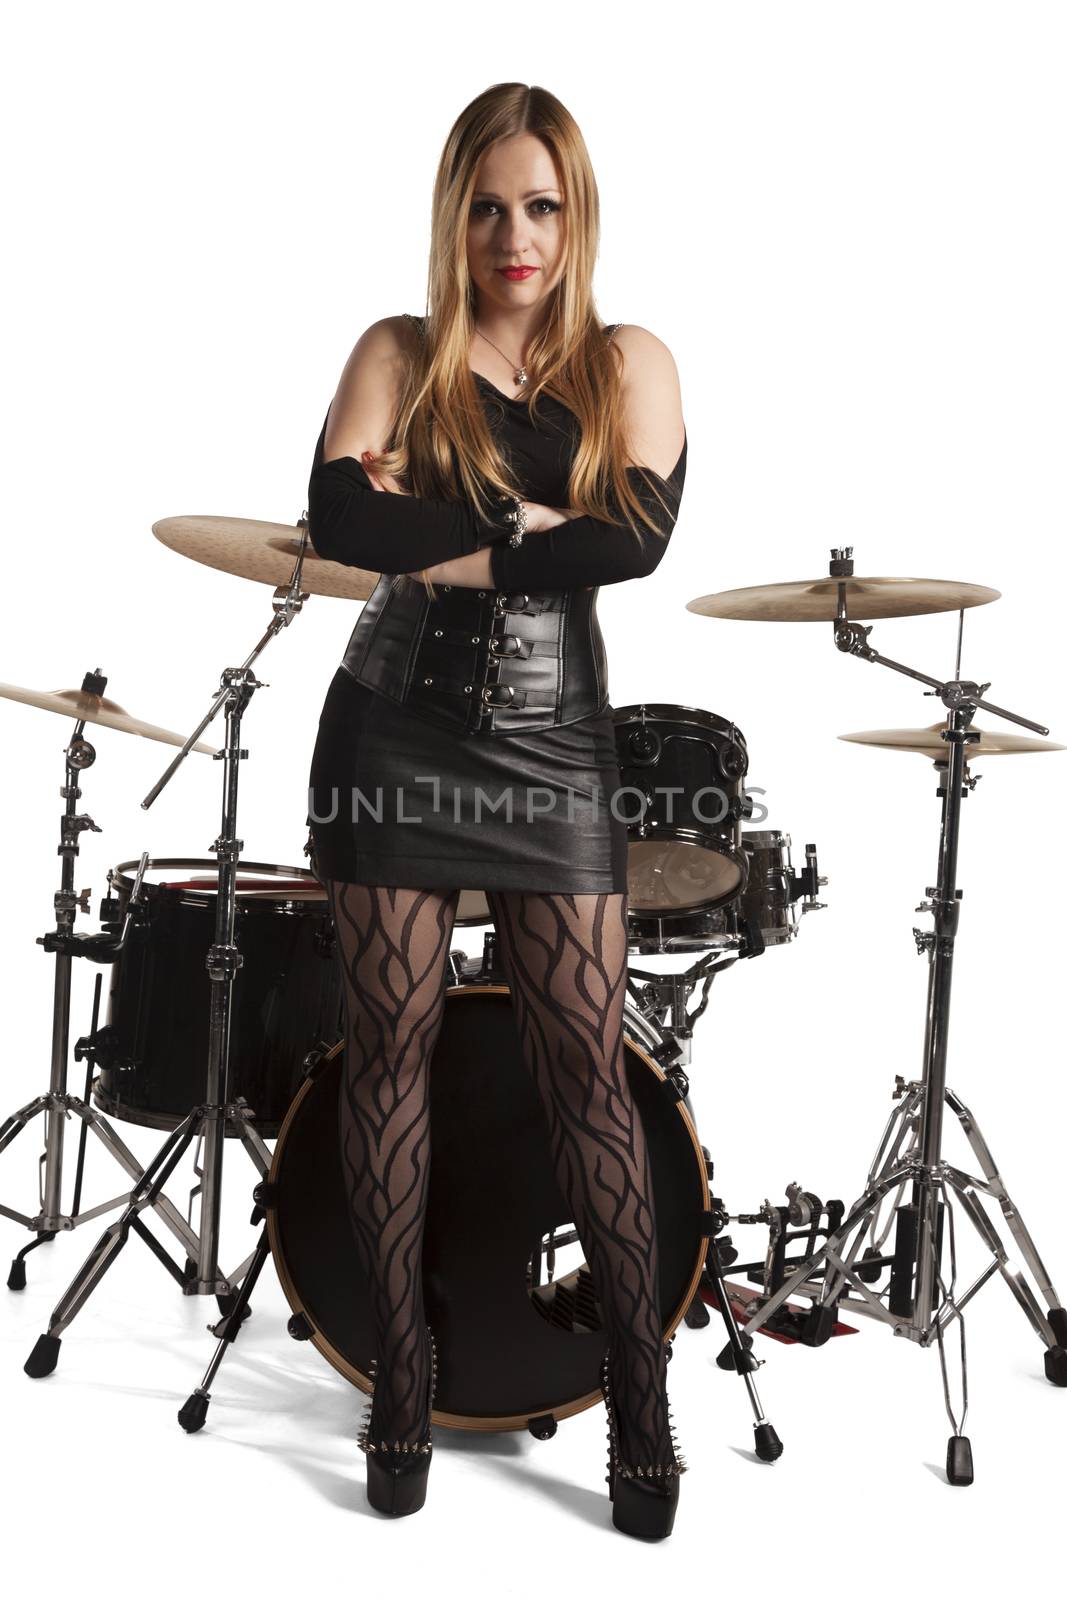 Young woman standing in front of drumkit on white background